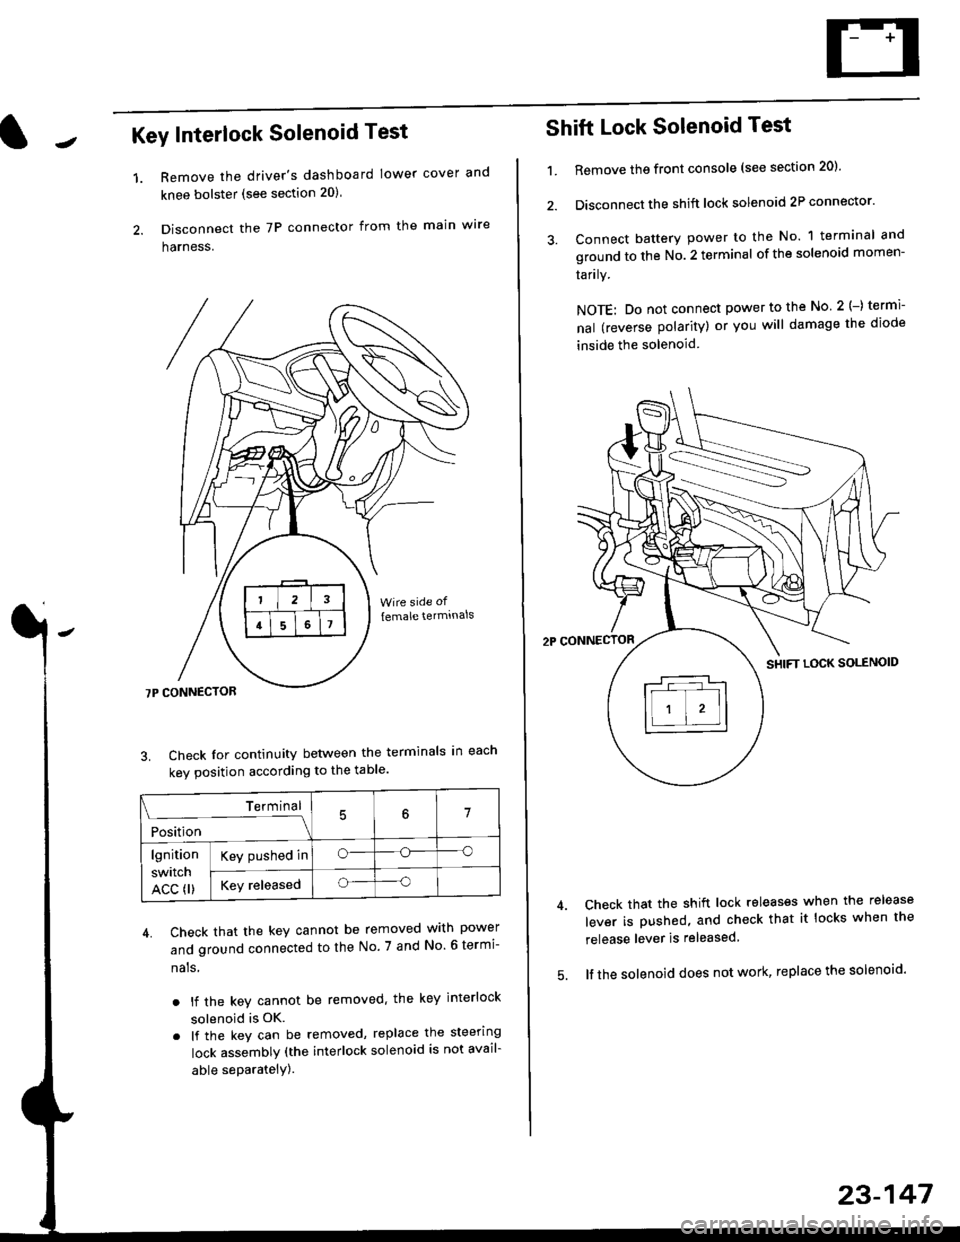 HONDA CIVIC 1996 6.G Workshop Manual Key Interlock Solenoid Test
Remove the drivers dashboard lower cover and
knee bolster (see section 20)
Disconnect the 7P connector from the main wre
harness.
3. Check Ior continuity between the term